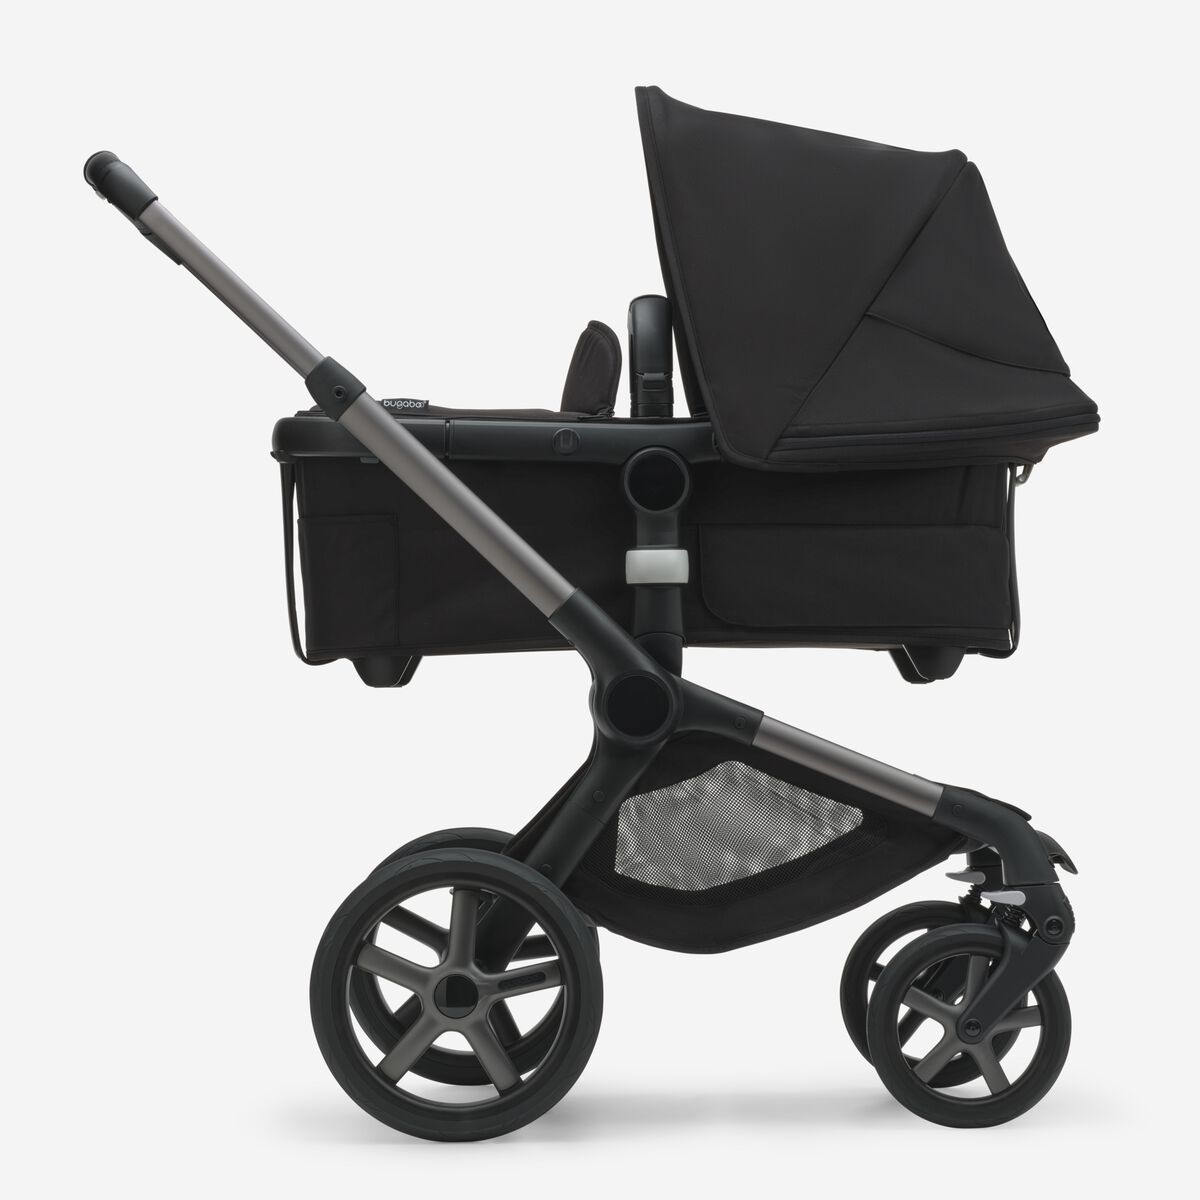 A black stroller with a black seat.